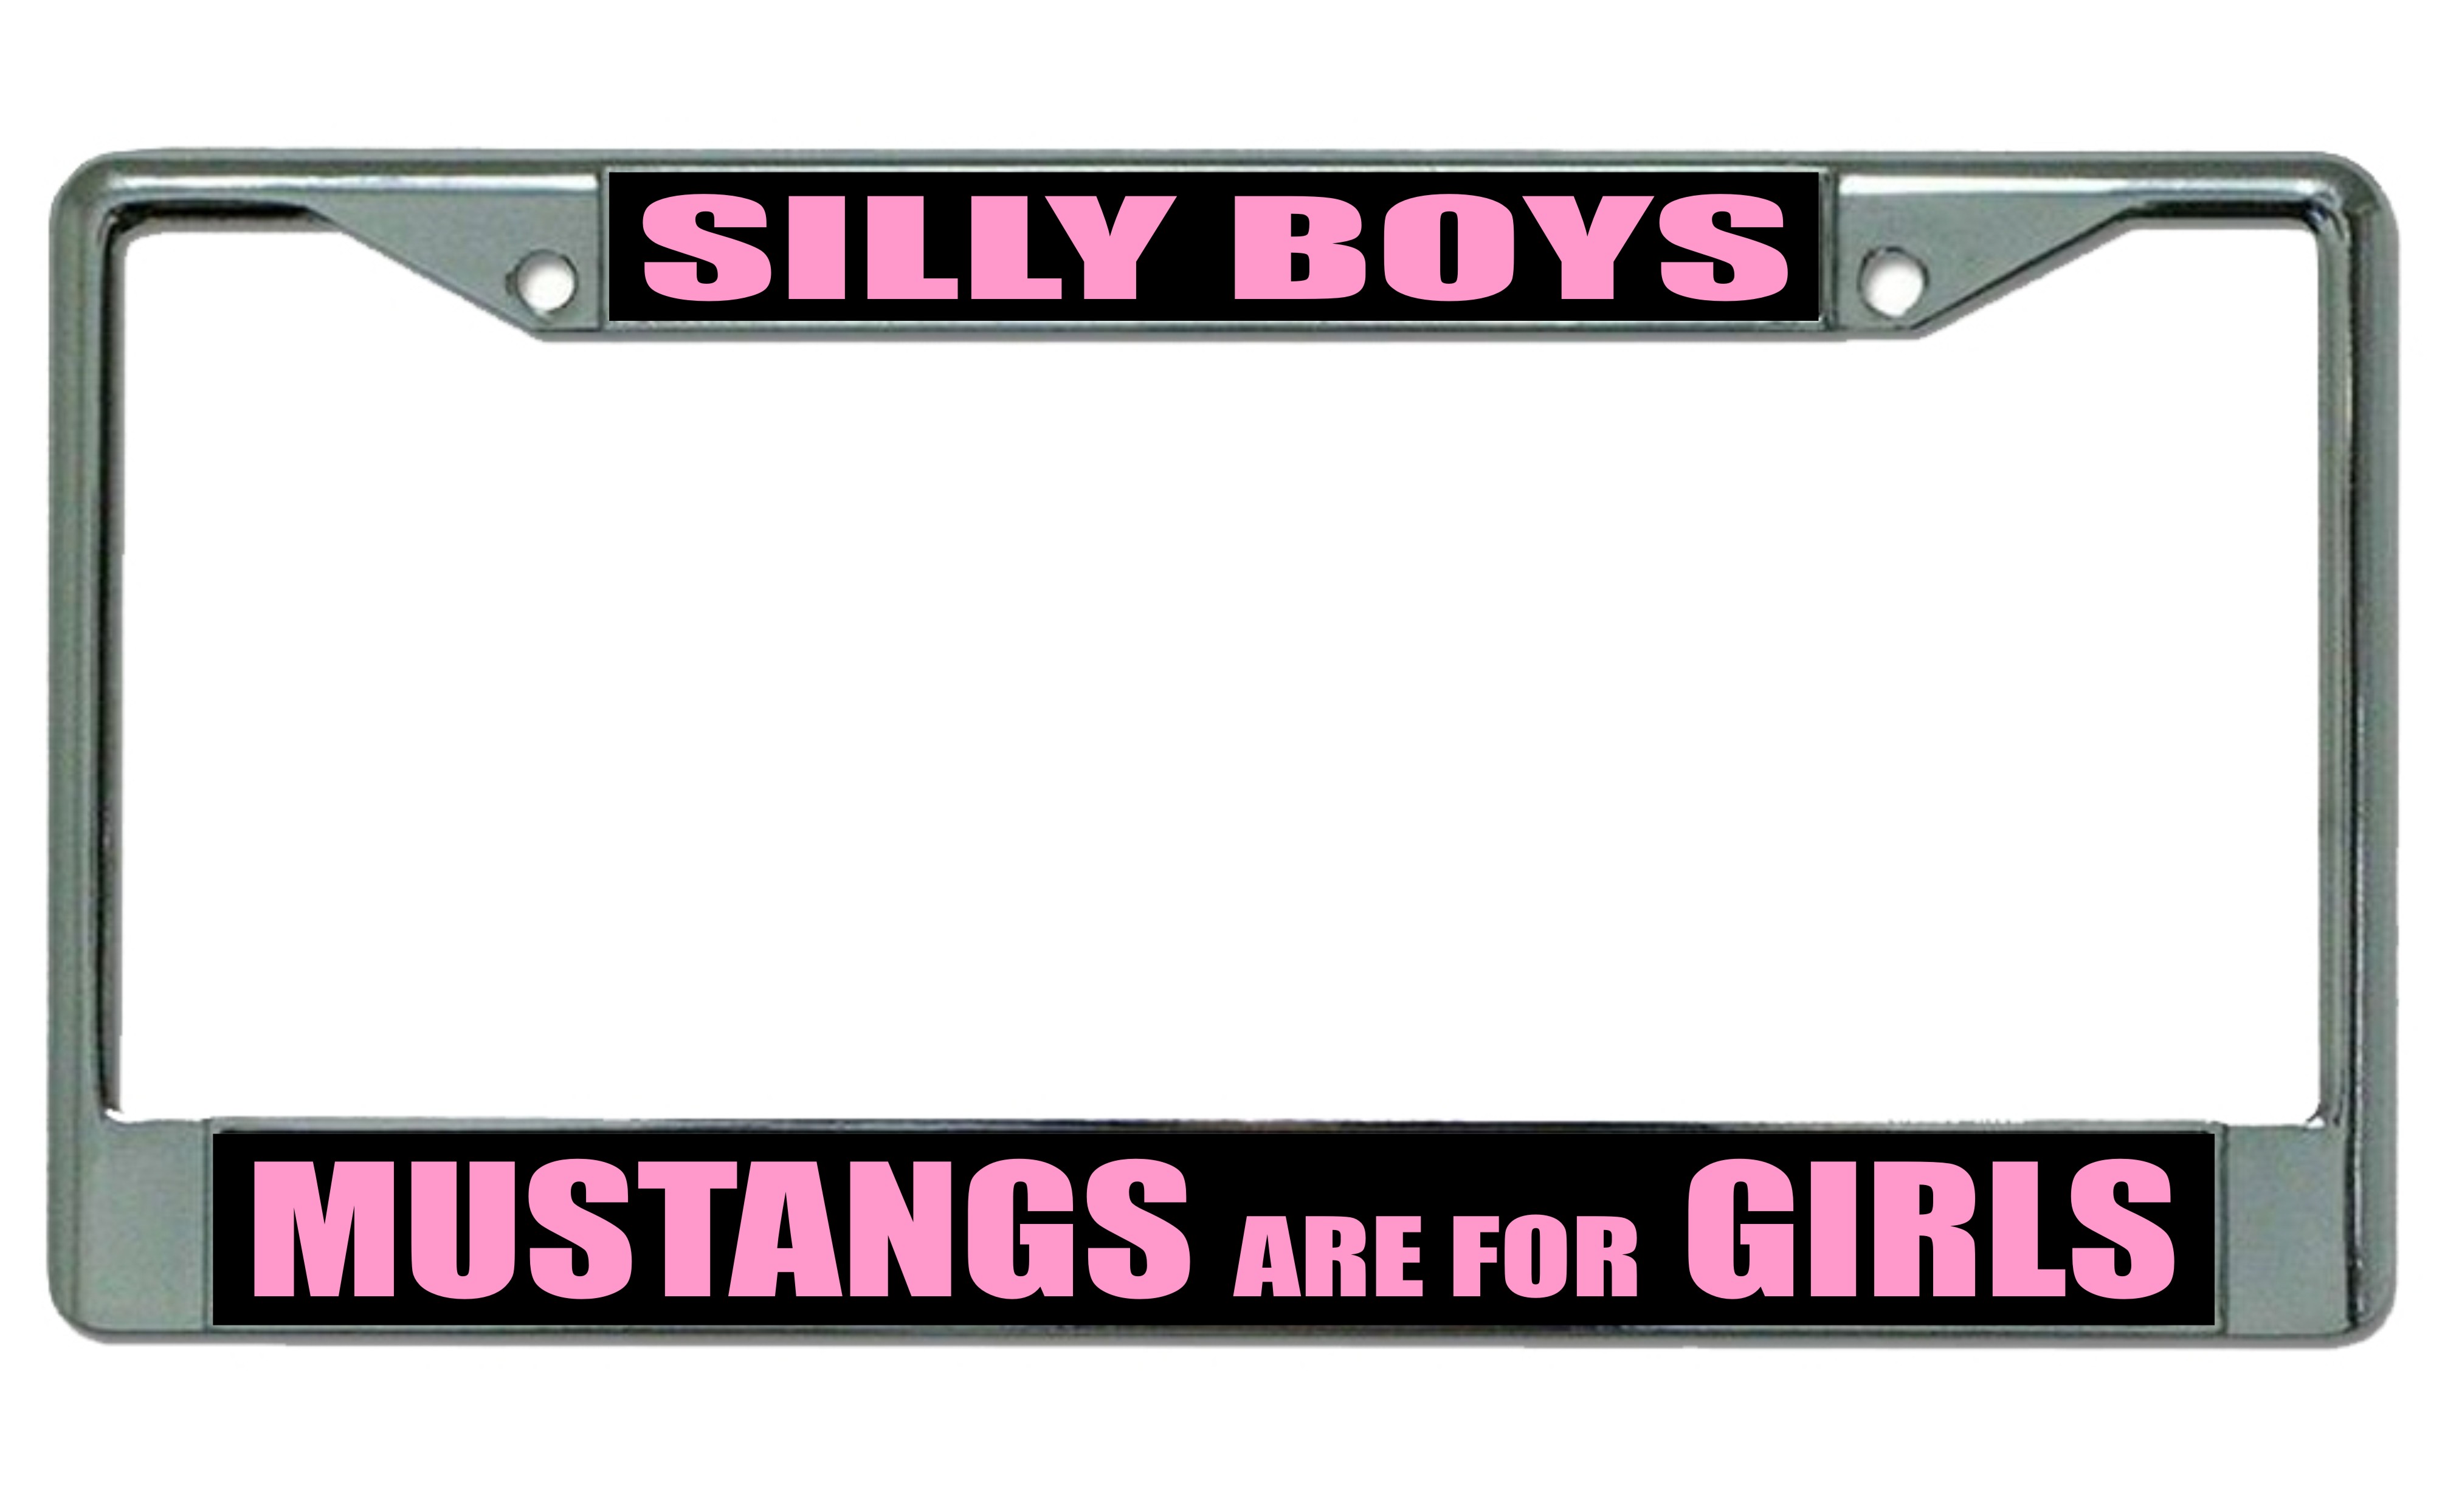 License Plates Online Silly Boys Mustangs Are For Girls Frame